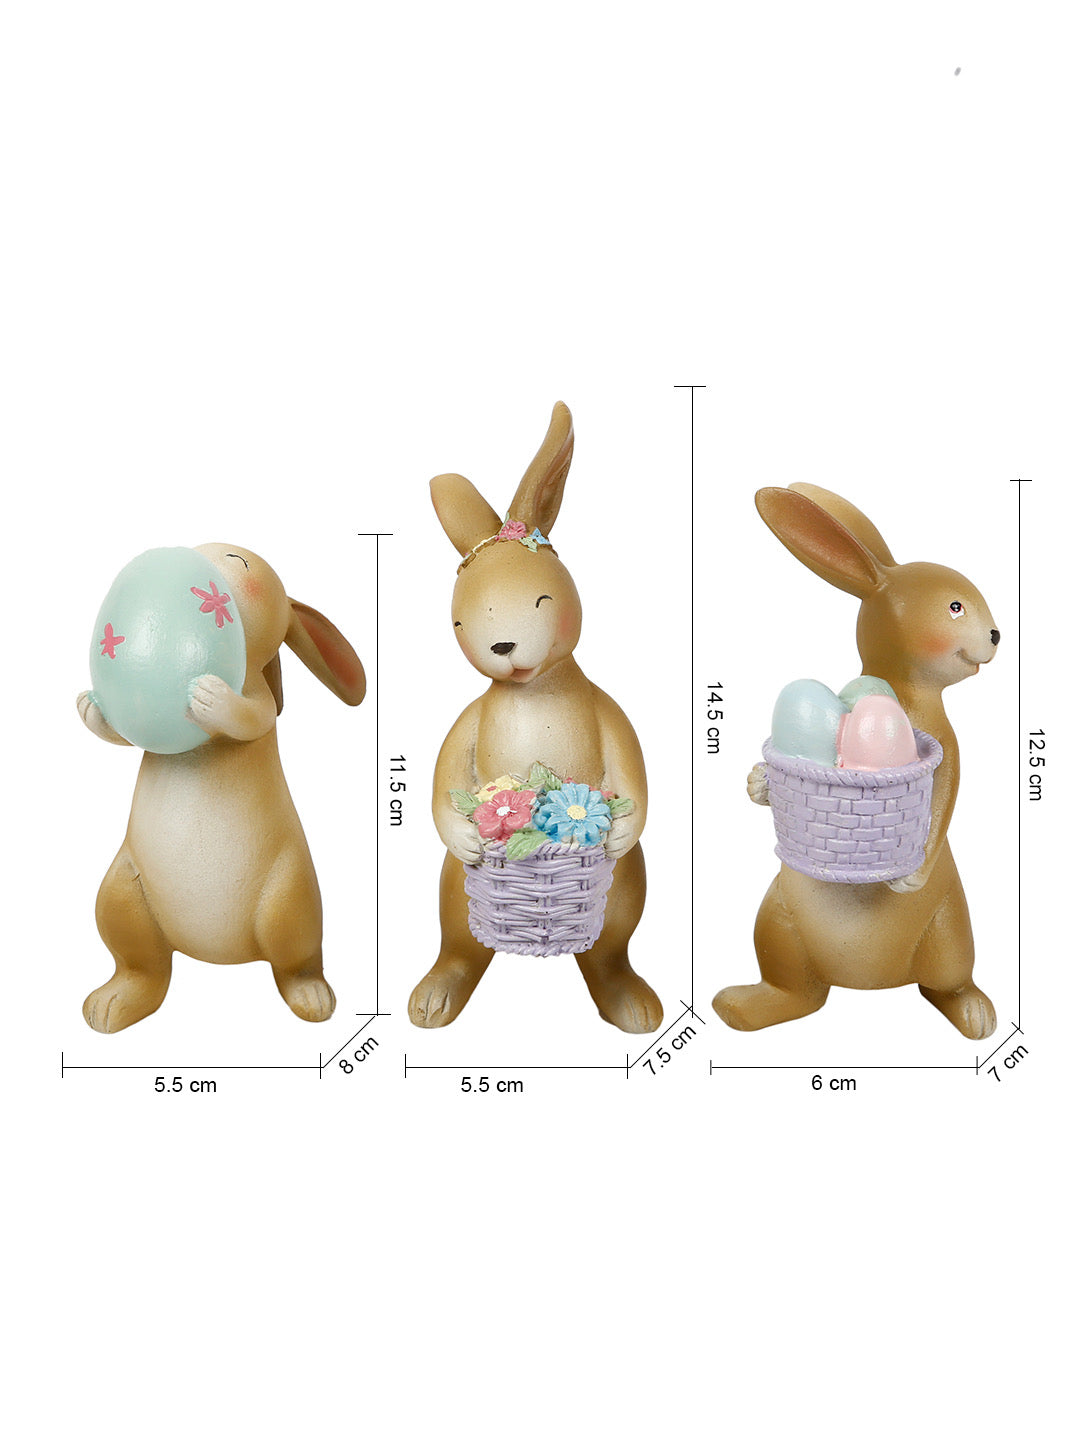 Cute and Playful Polyraisin Bunny Set - Default Title (SHOW21188_3)